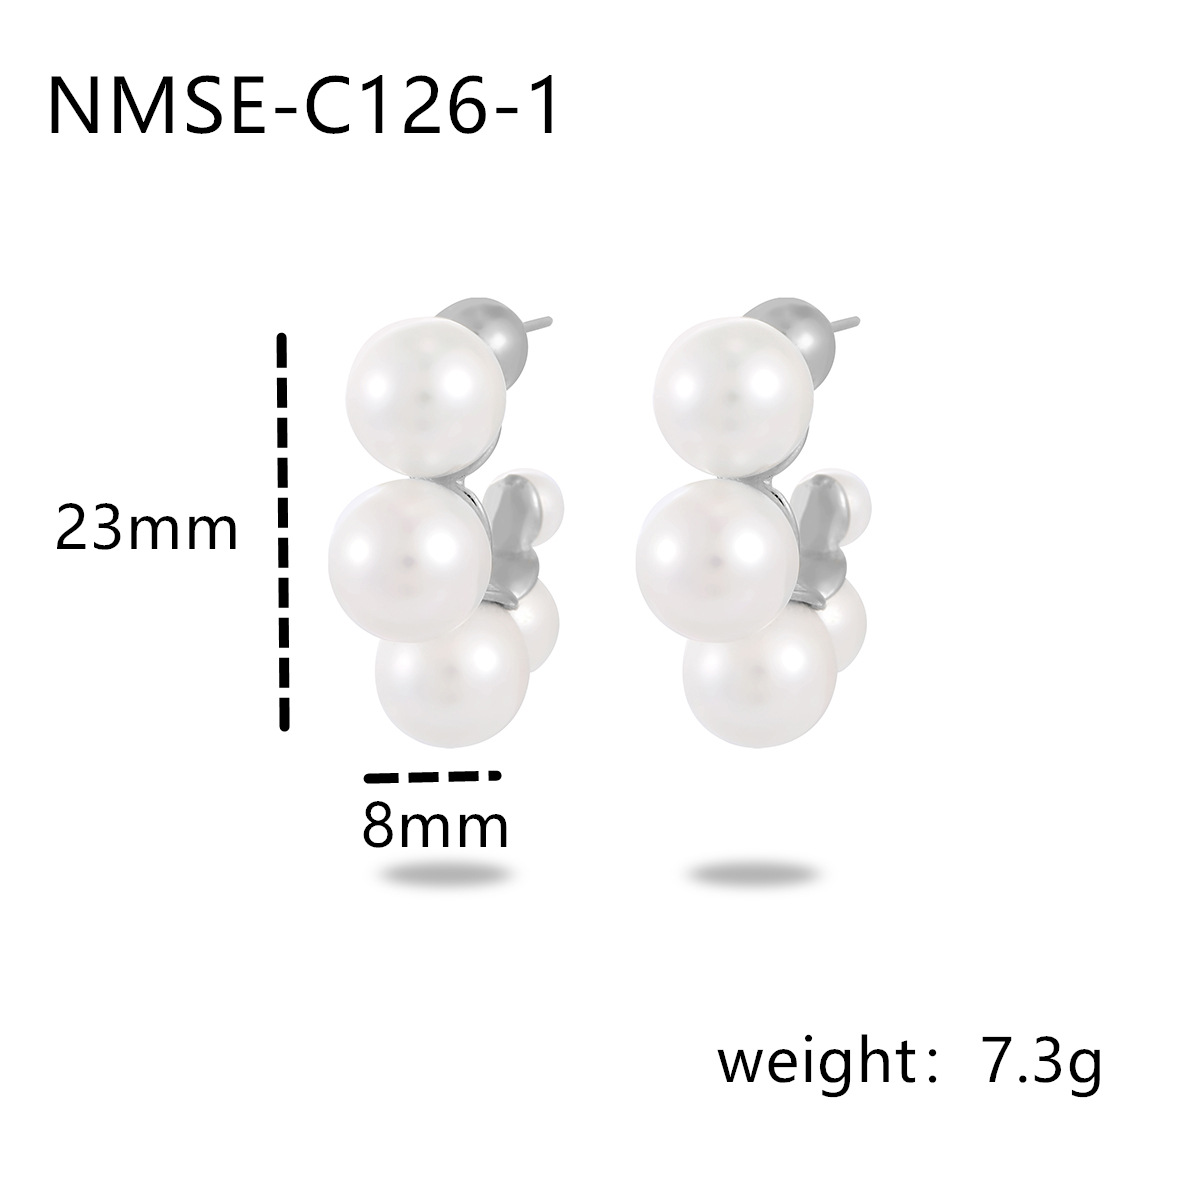 5:NMSE-C126-1